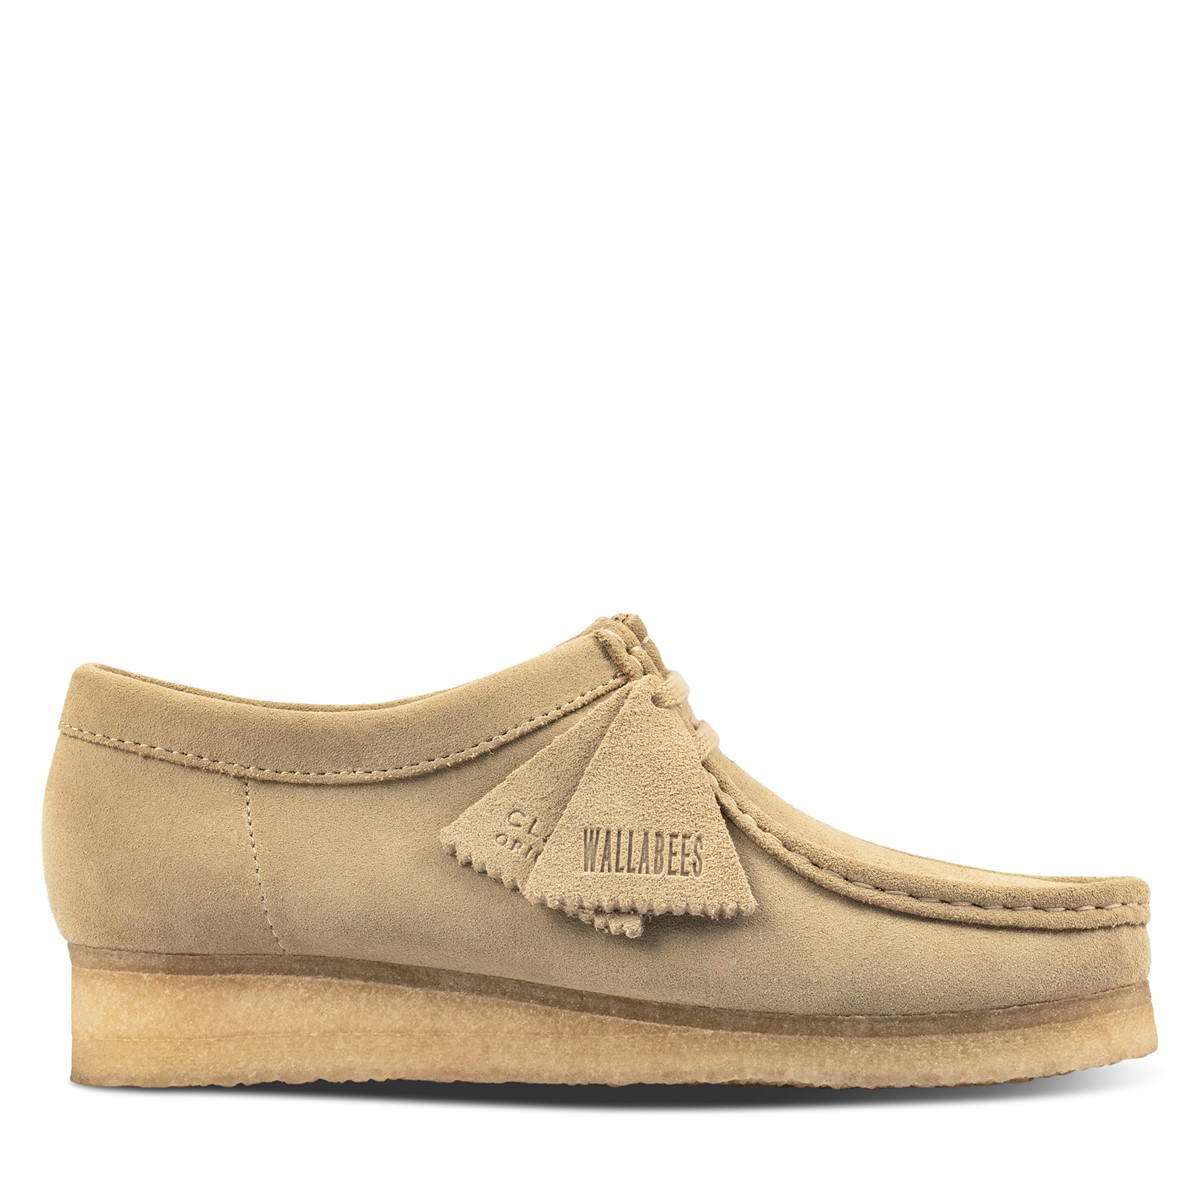 Chaussures style mocassin Wallabee beiges pour femmes